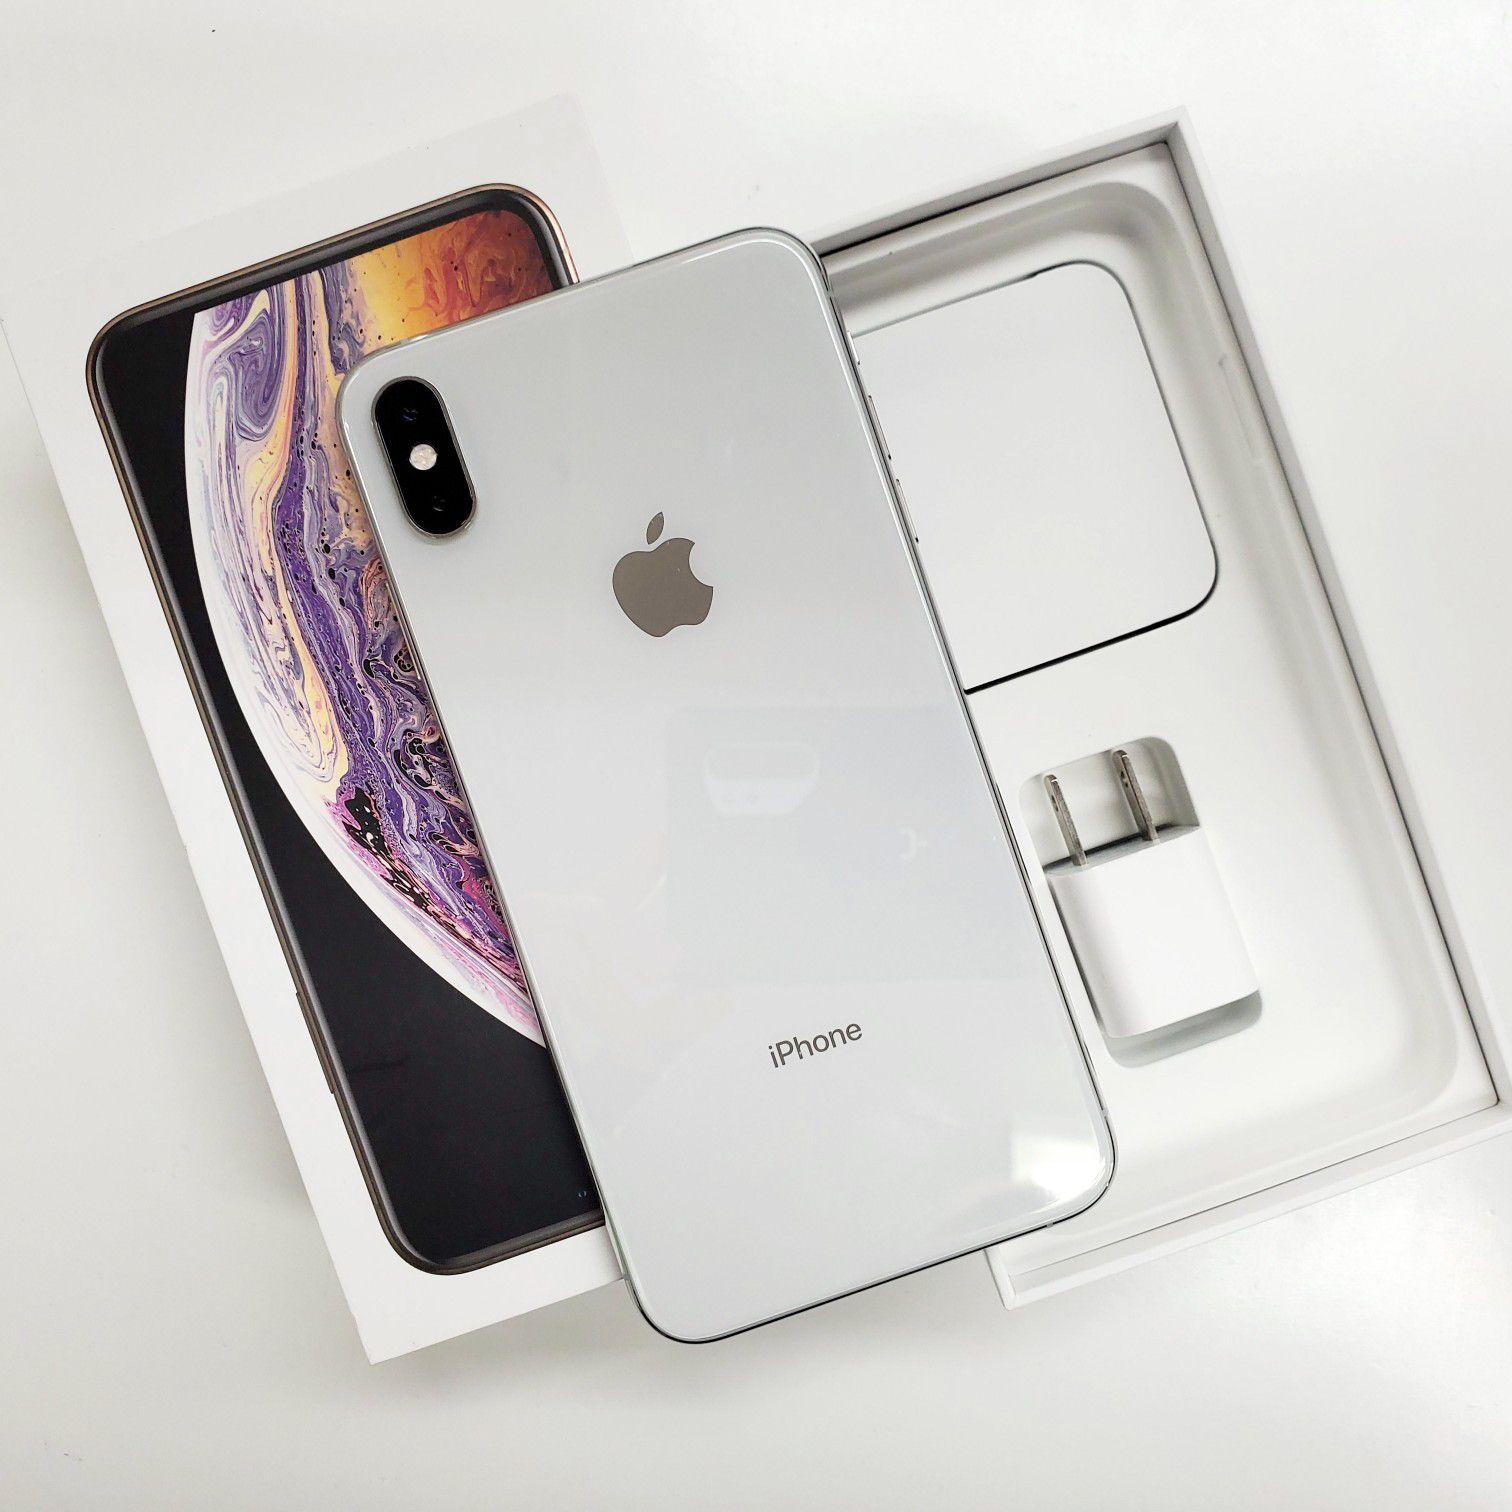 iPhone Xs Max Unlocked To Any Carrier SILVER 512GB